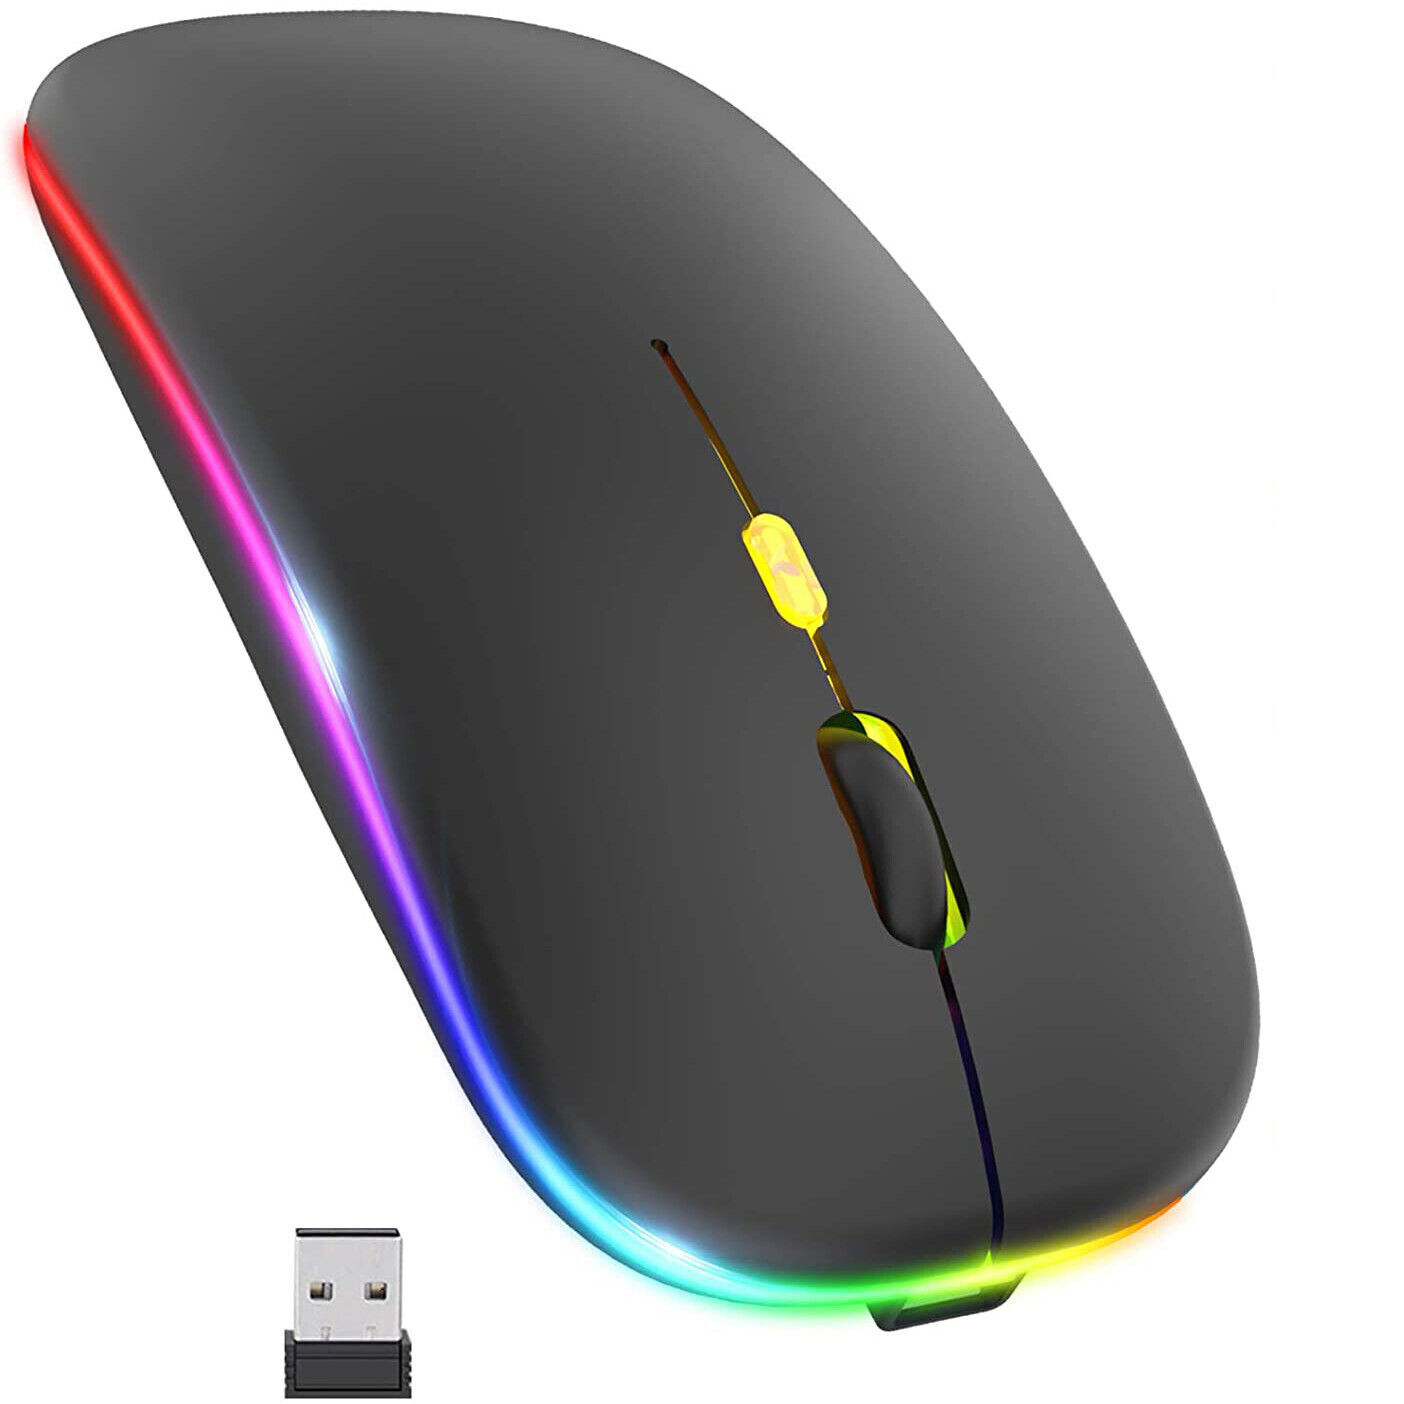 2.4GHz Bluetooth Wireless Optical Mouse USB Rechargeable RGB Mice for PC Laptop